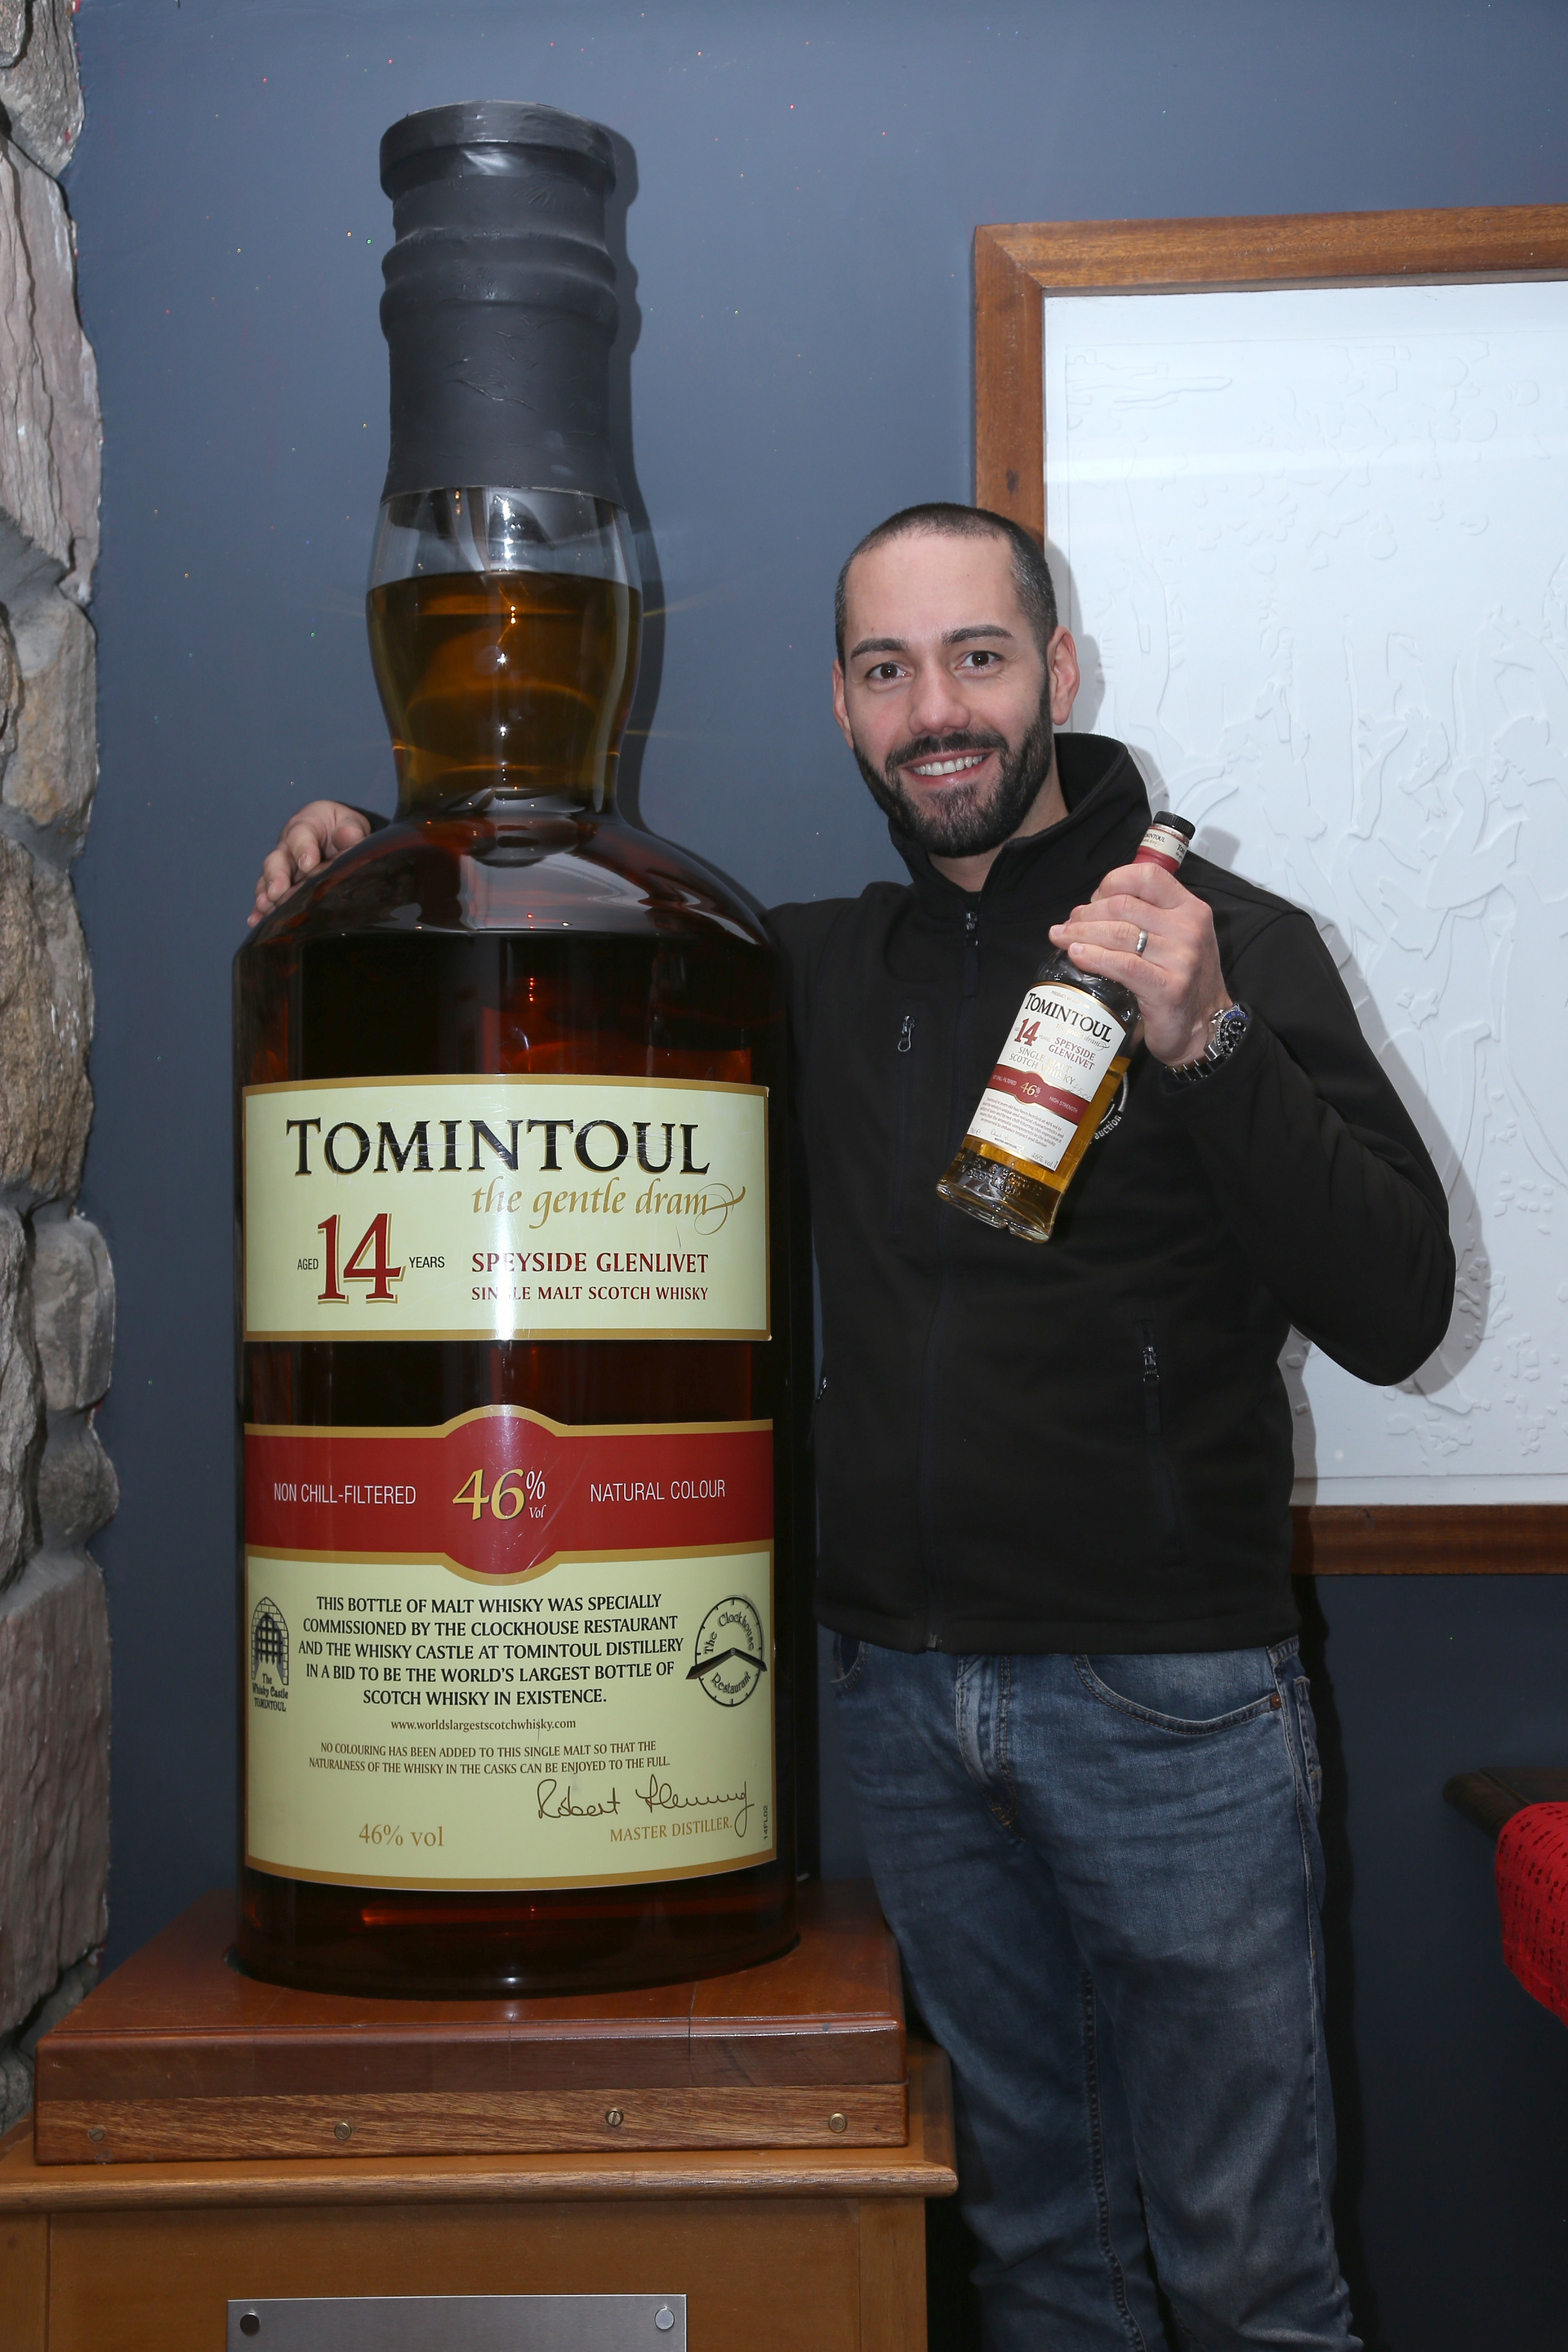 https://www.just-whisky.co.uk/190466-thickbox_default/tomintoul-14-years-old-worlds-largest-bottle-of-single-malt-whisky-1053litres.jpg